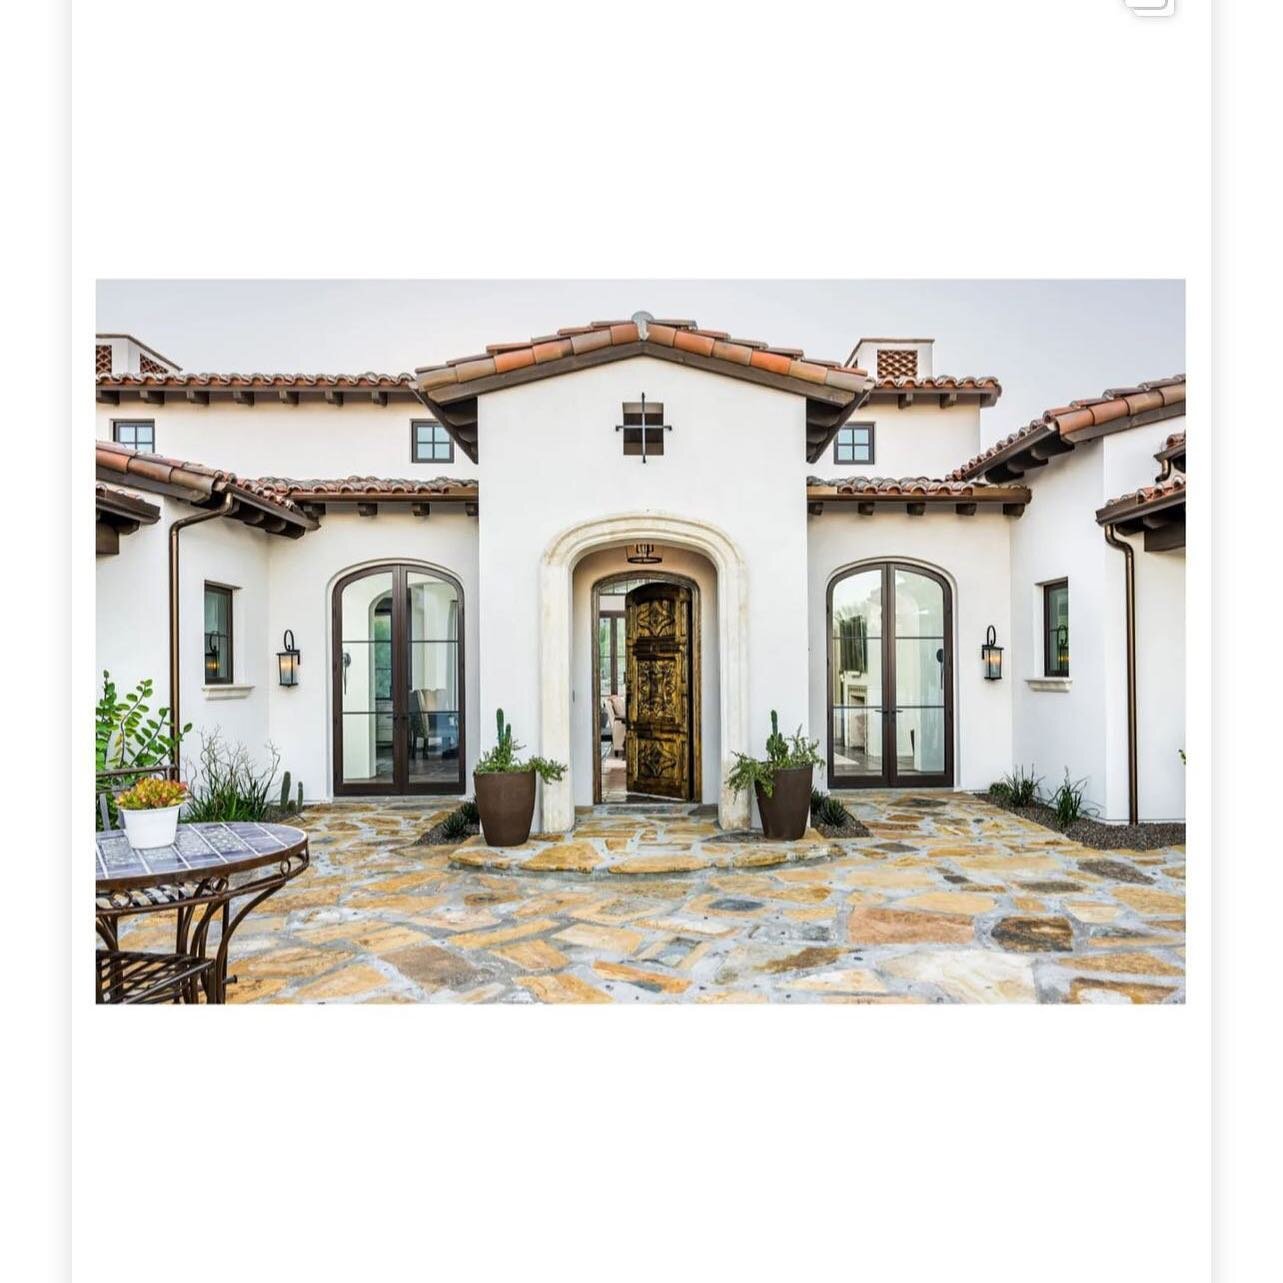 @provisuals.media Beautifully captured this hacienda style home. We created this front door with hand carving as well as the carved vanity and hand forged iron hood. We enjoyed working with this very talented team @candelariadesign @goldenheritagehom